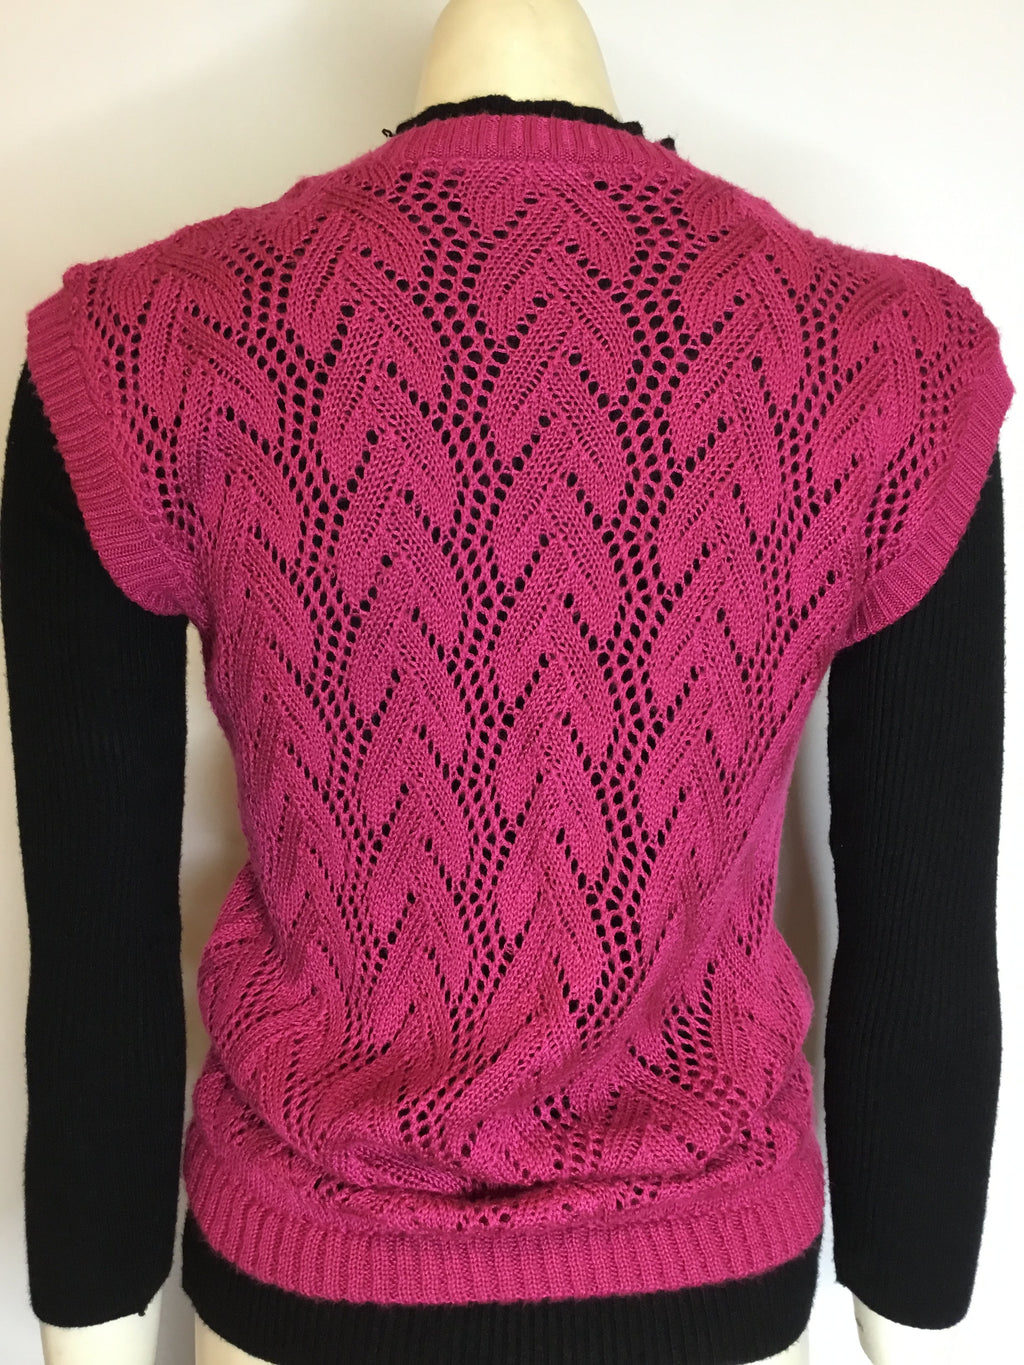 Vivid Magenta Knitted Vest - AS IS - general wear / marks